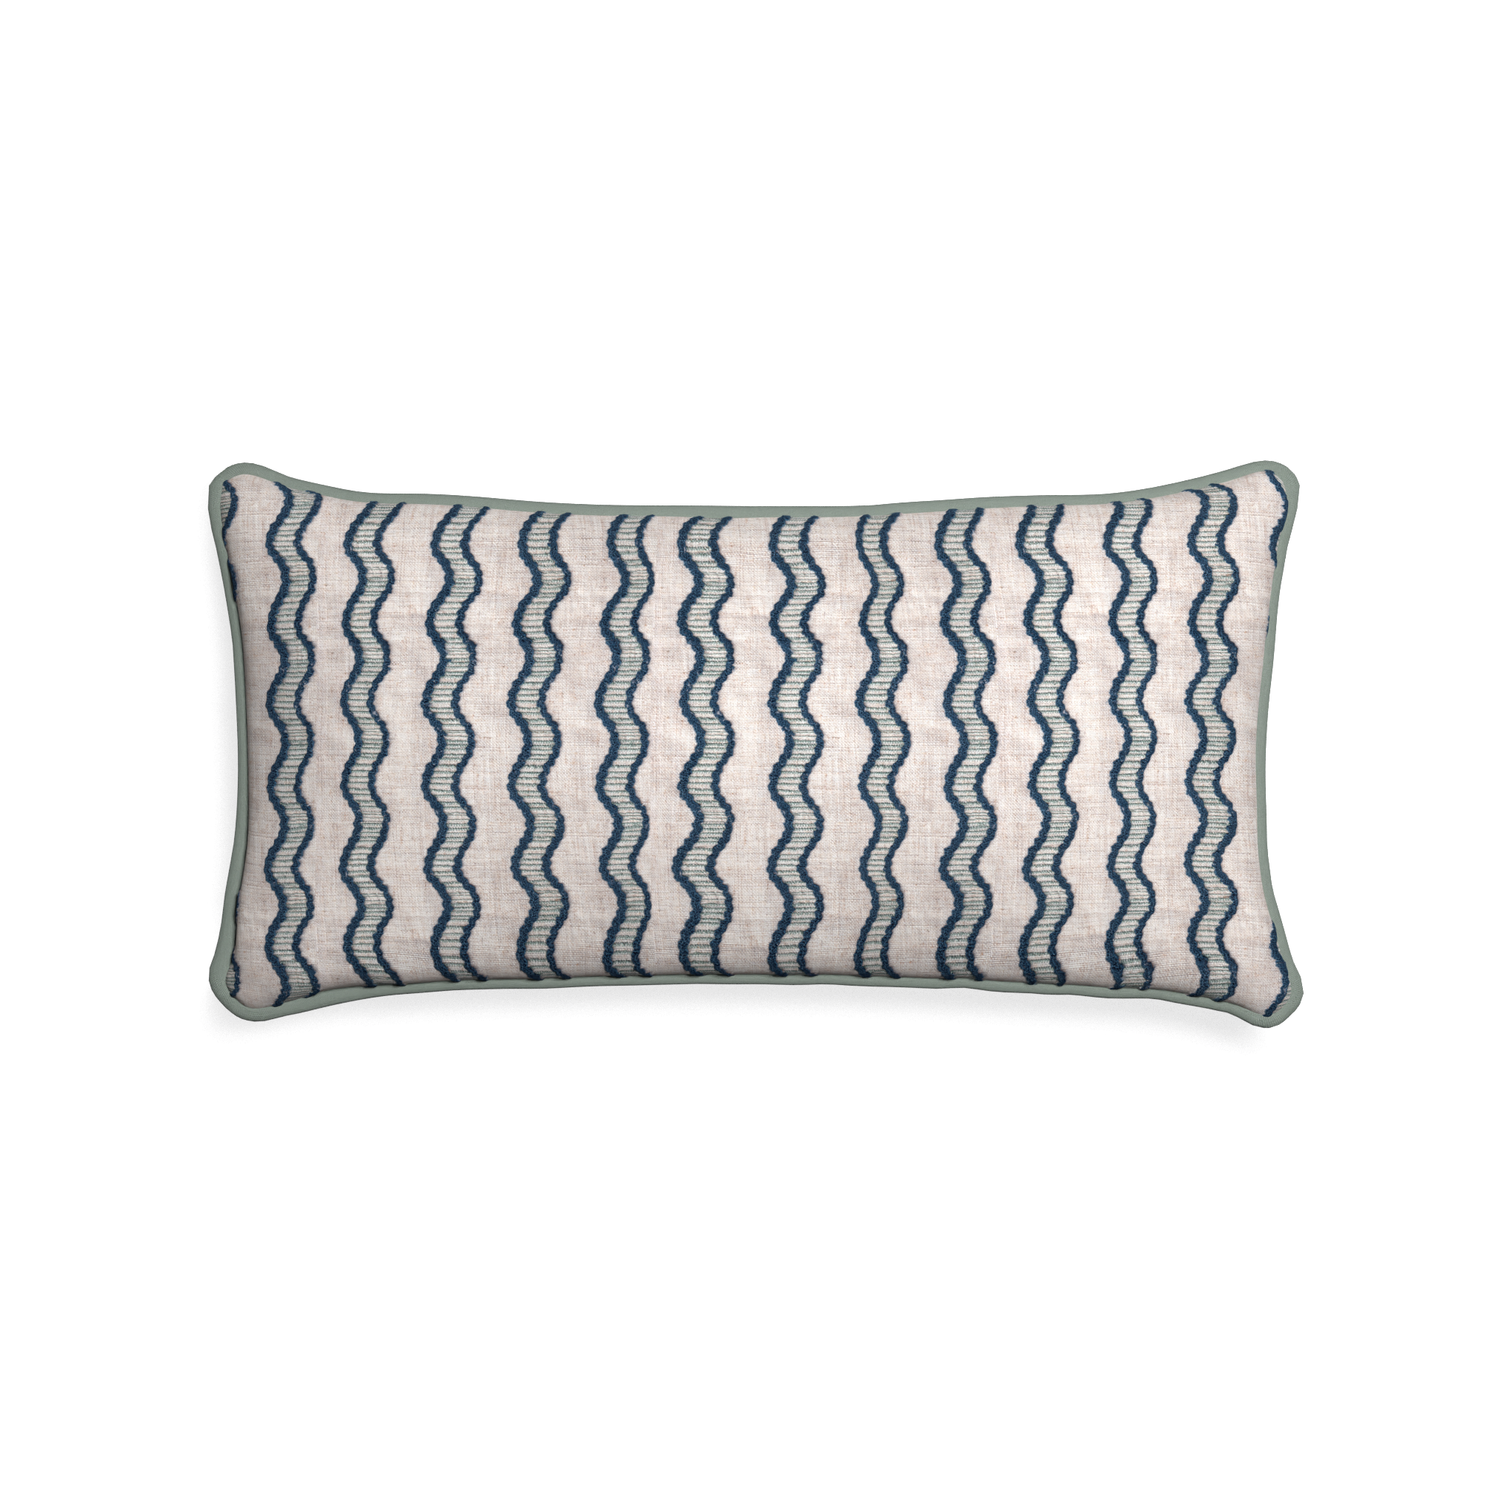 Midi-lumbar beatrice custom embroidered wavepillow with sage piping on white background